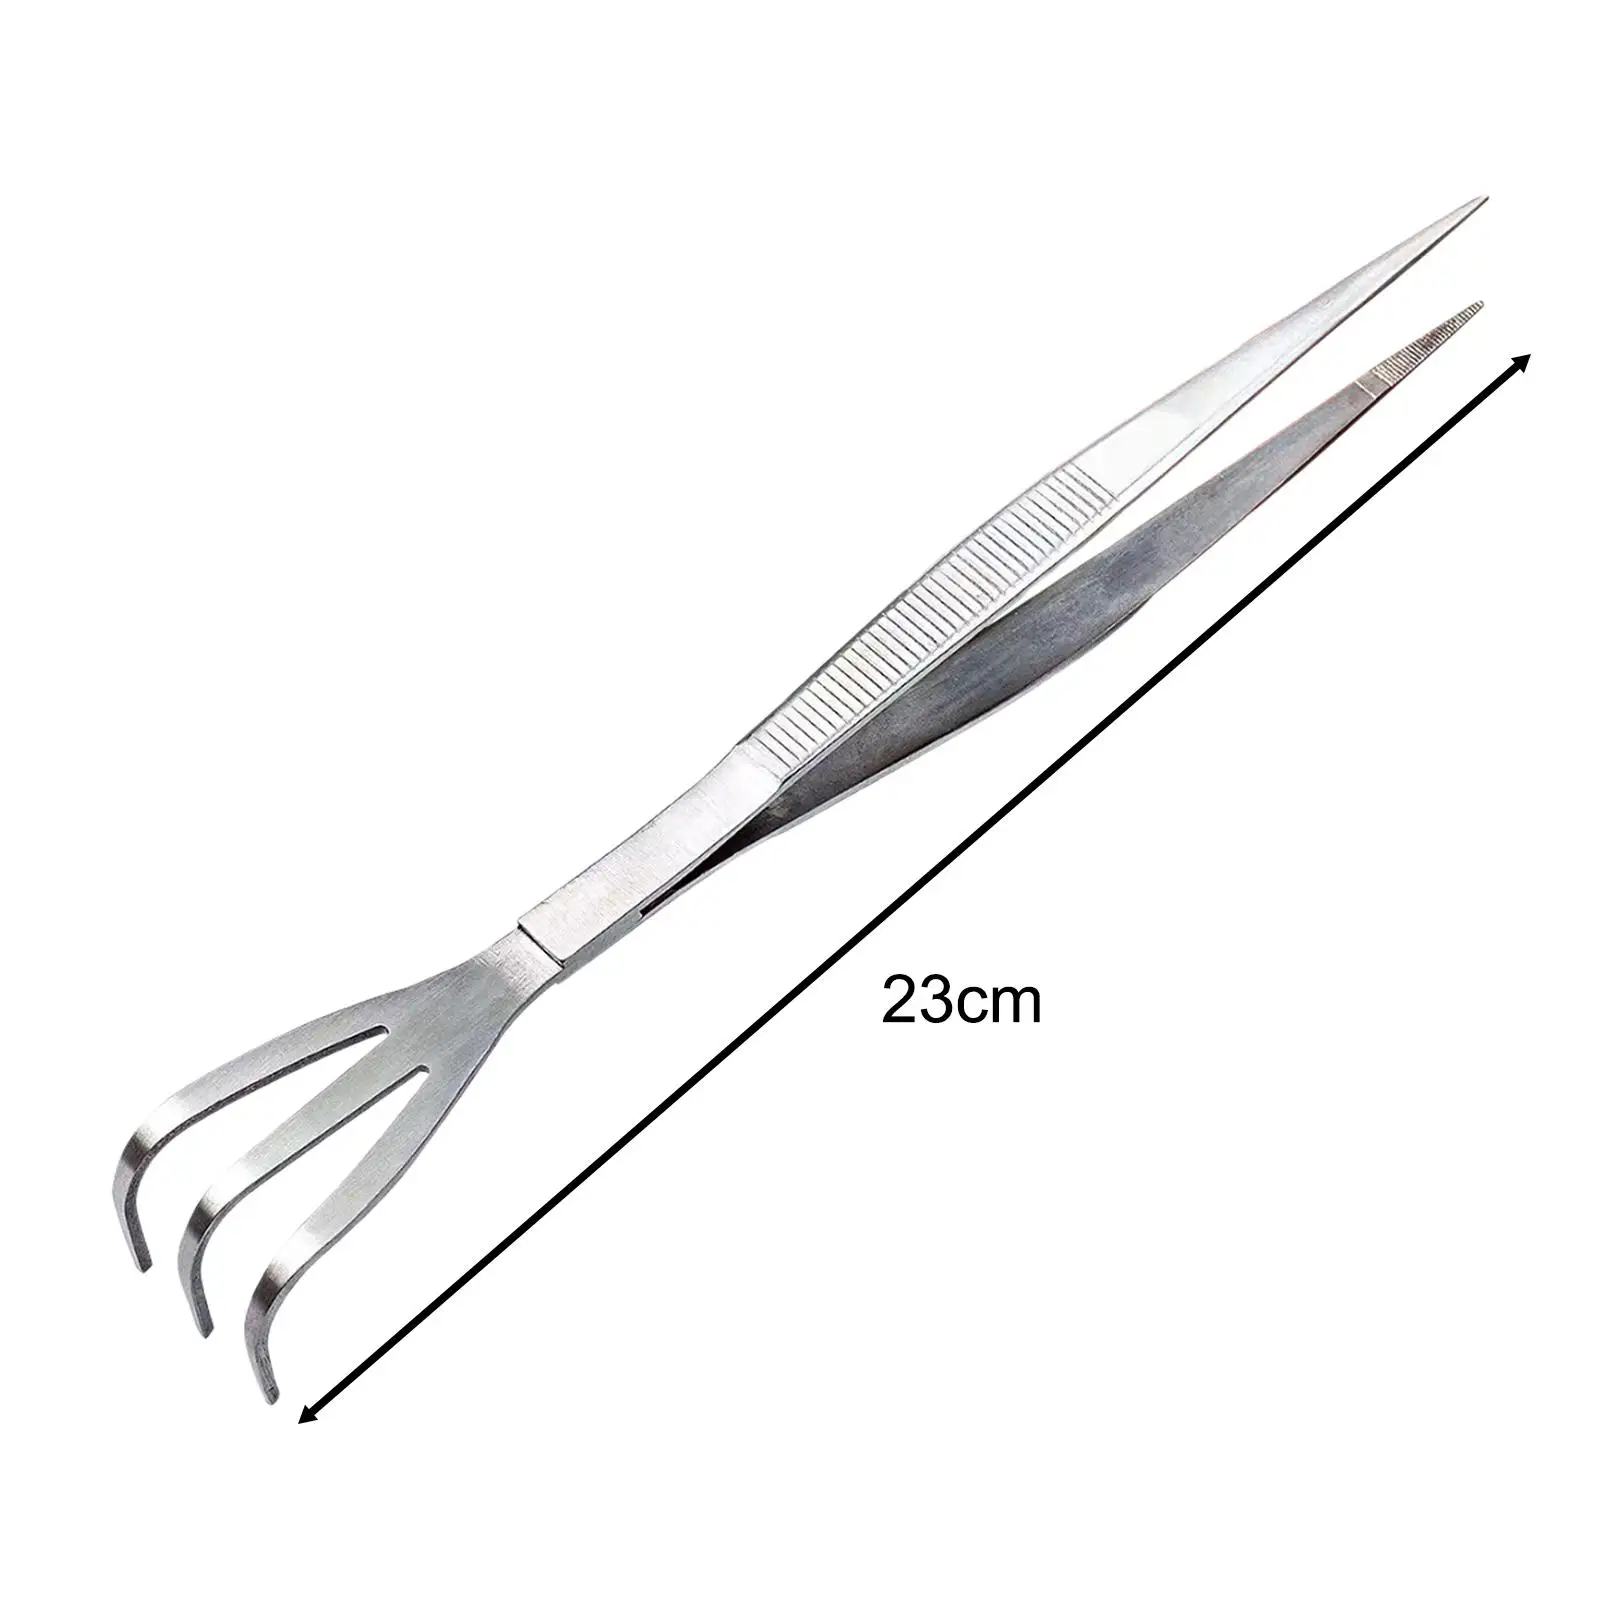 Bonsai Tweezers Multifunctional Professional Stainless Steel Portable Gardening Hand Tools for Garden Bonsai Office Home Plants